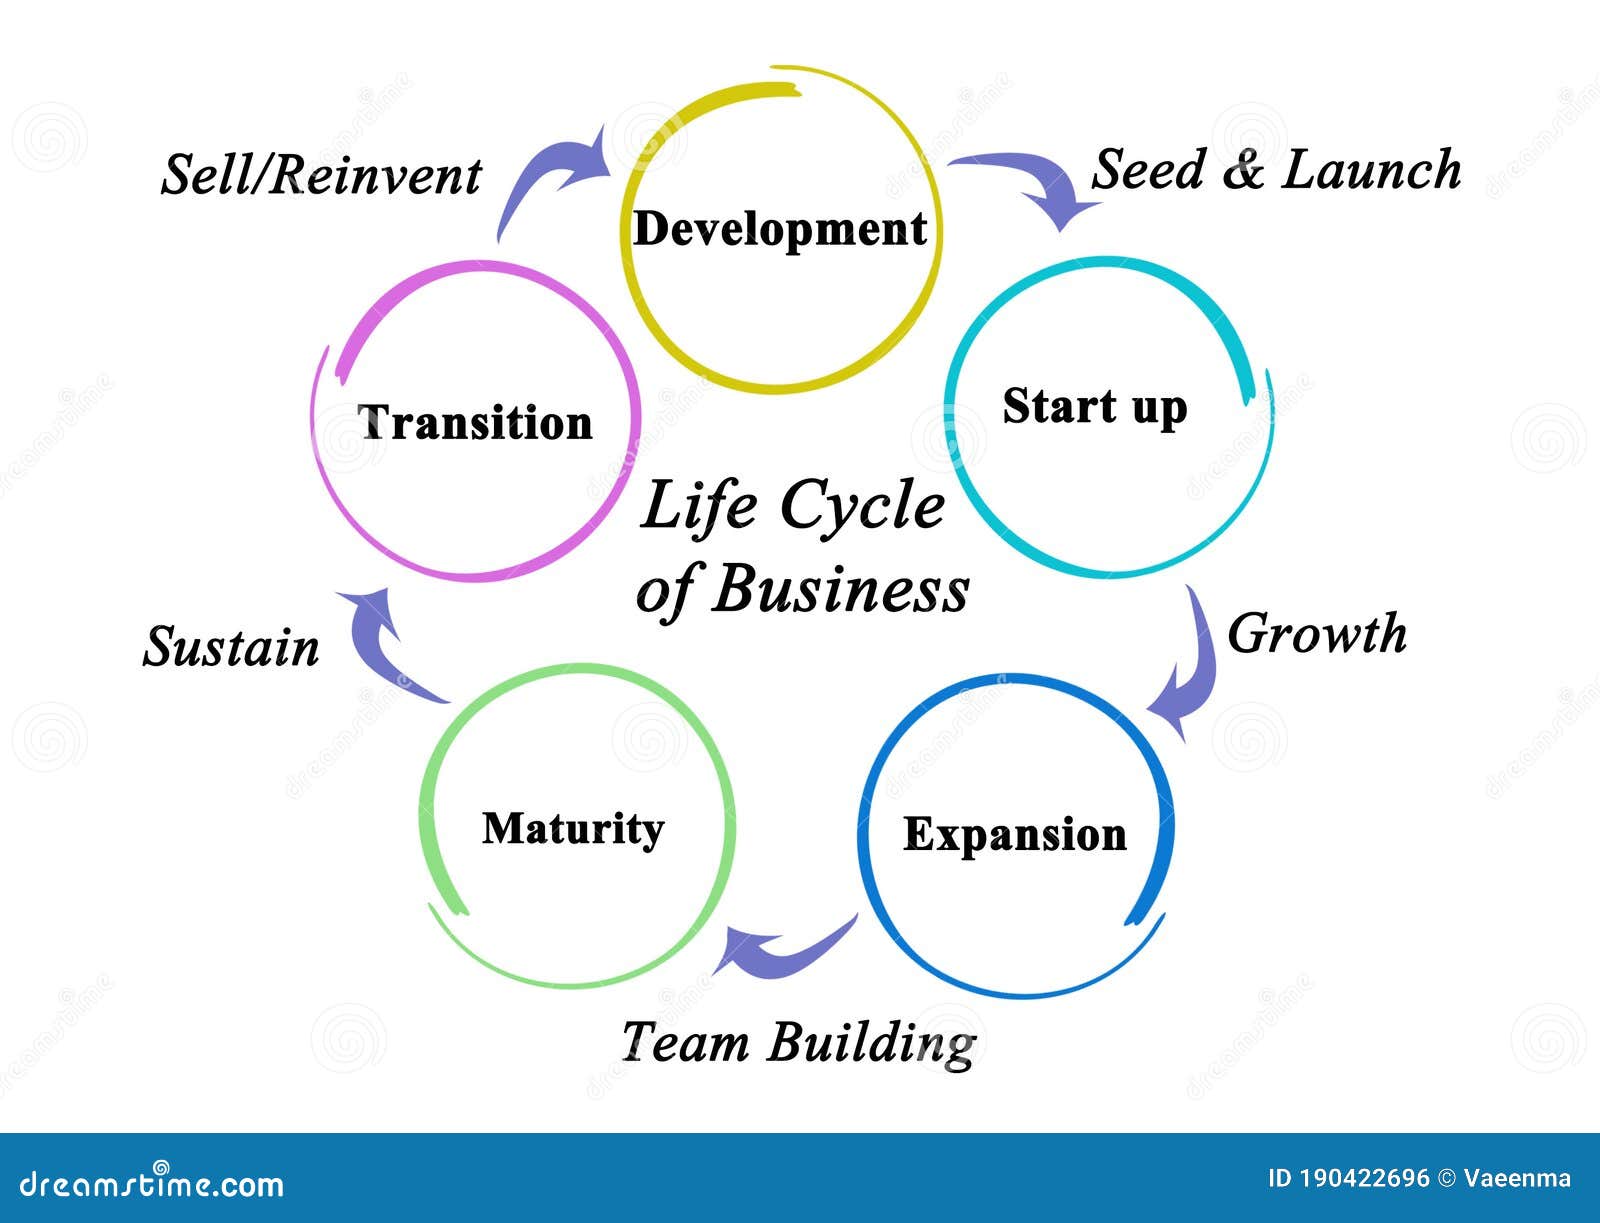 7 Stages Of Business Life Cycle